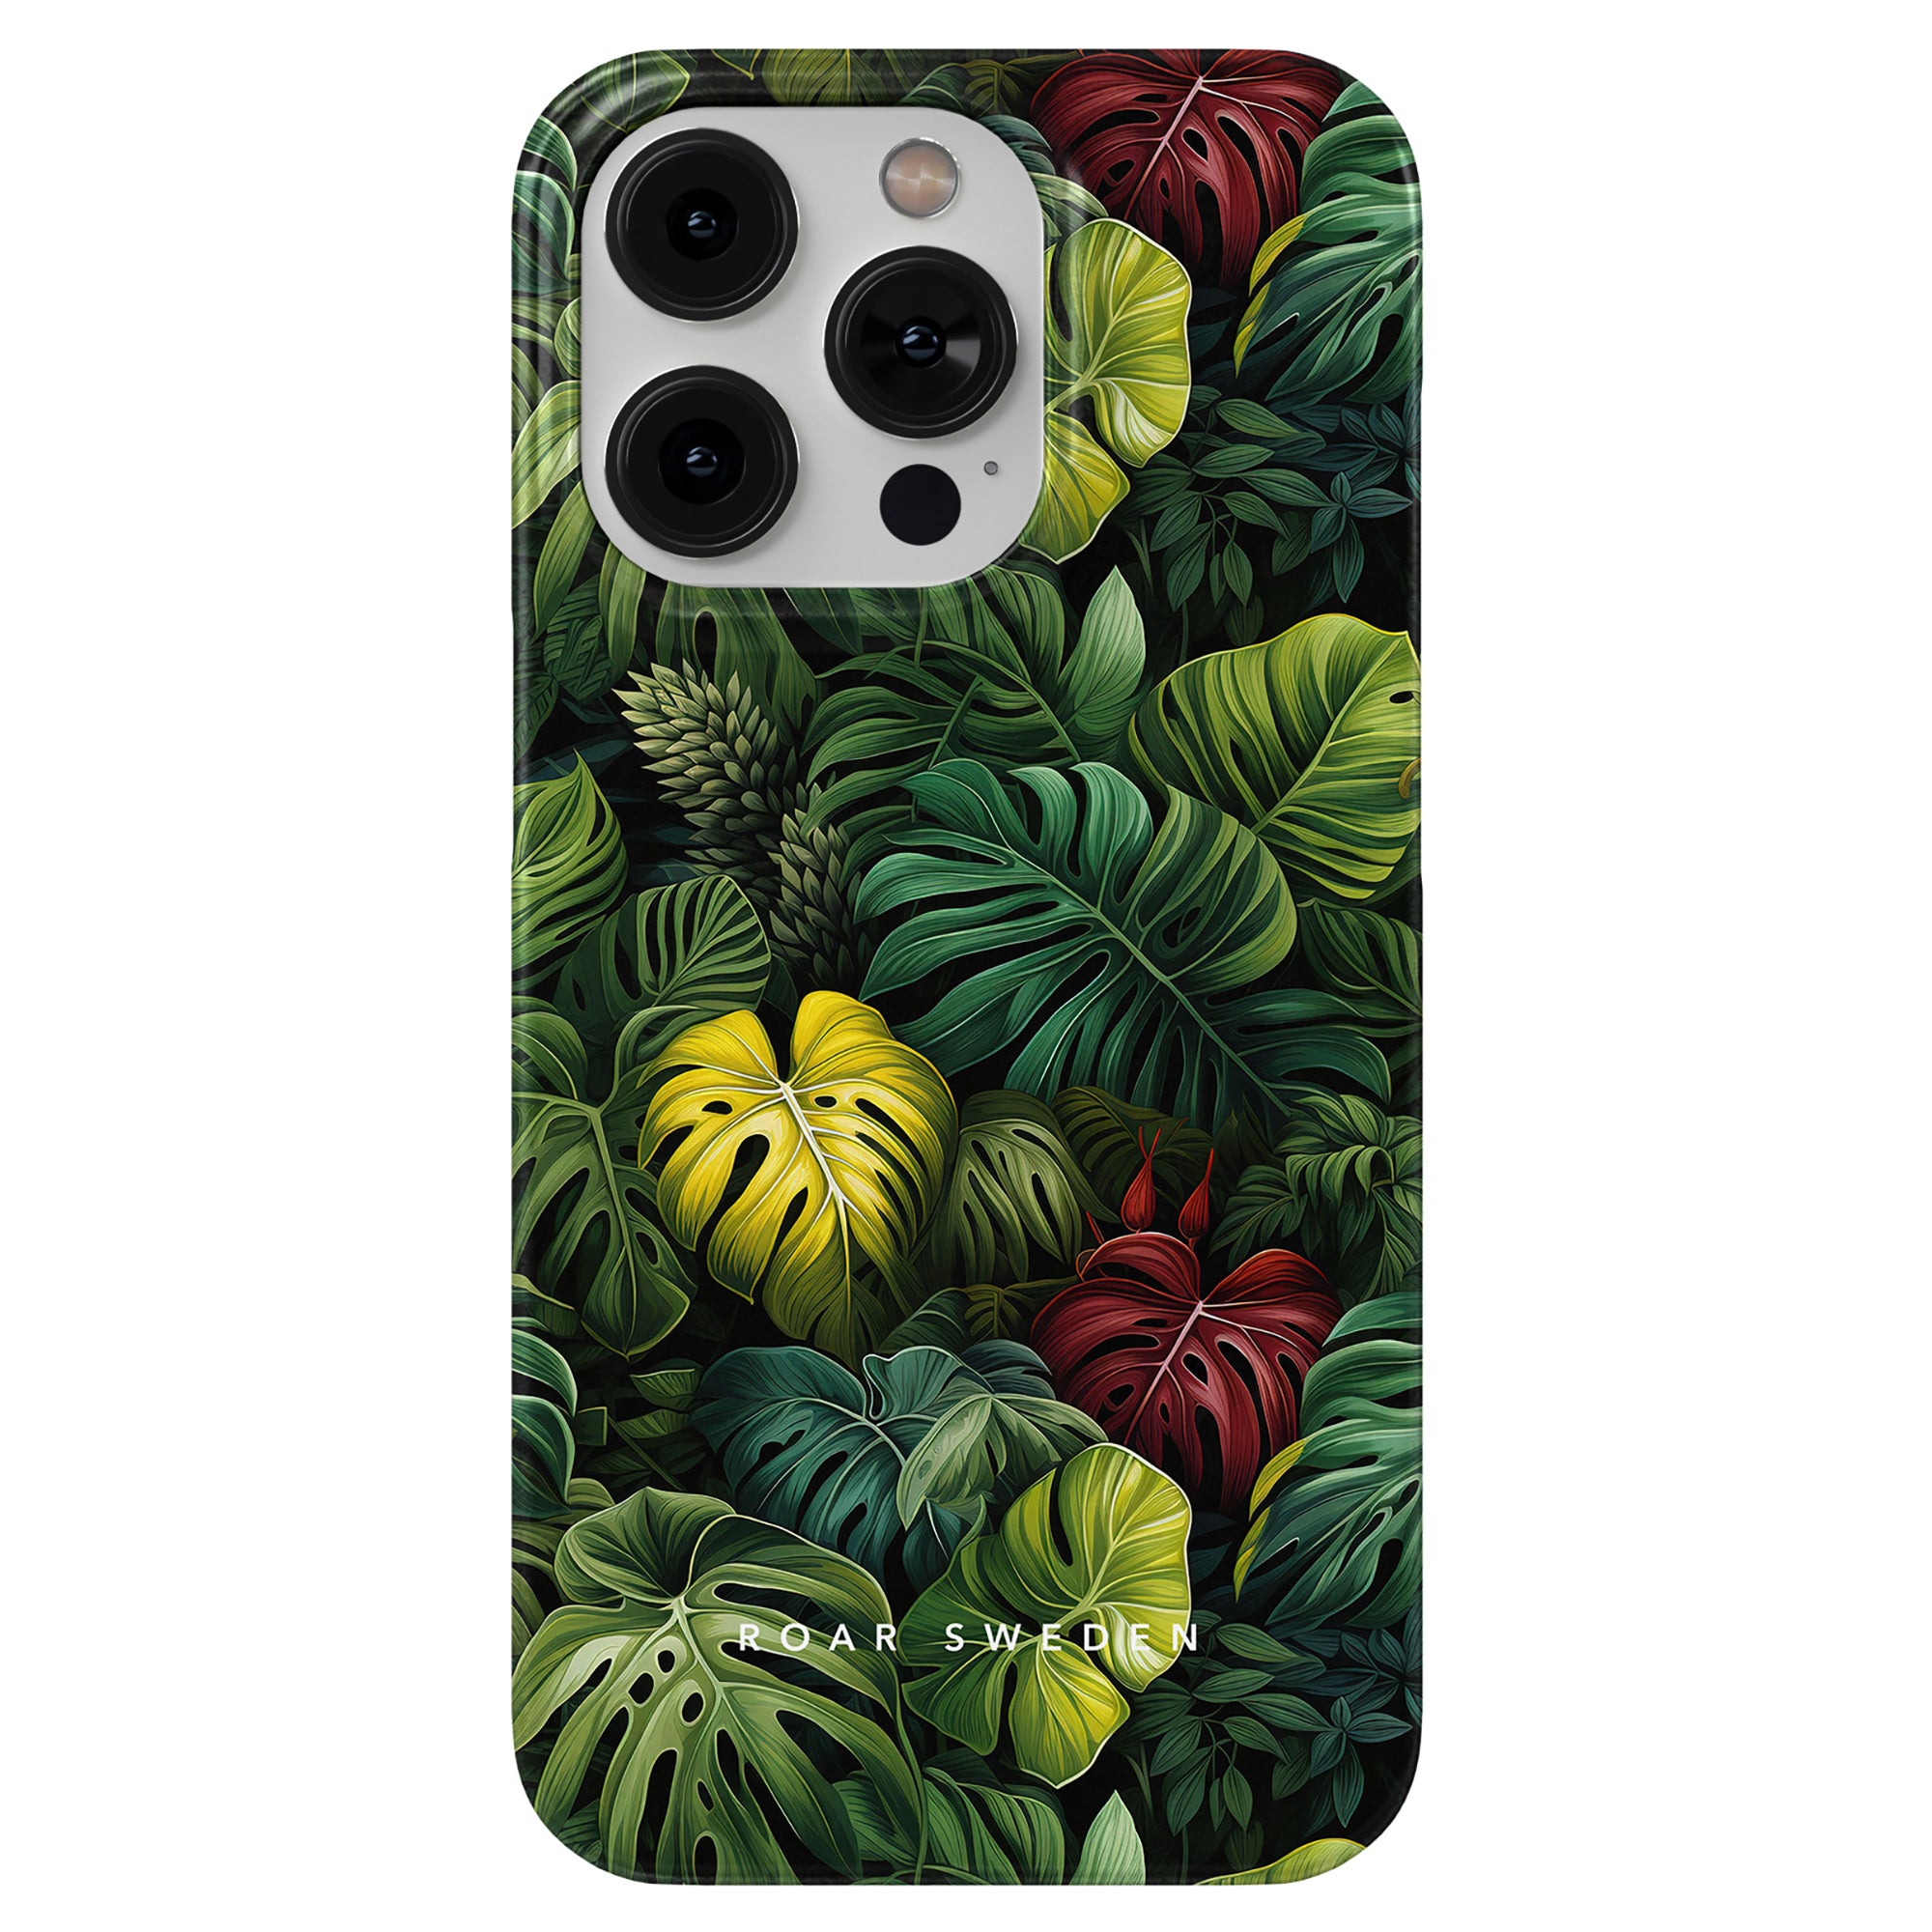 IPhone with a case featuring a tropical leaf design in various shades of green and red, reminiscent of the Jungle Collection. The Deliciosa - Slim case is branded "ROAR SWEDEN" at the bottom.